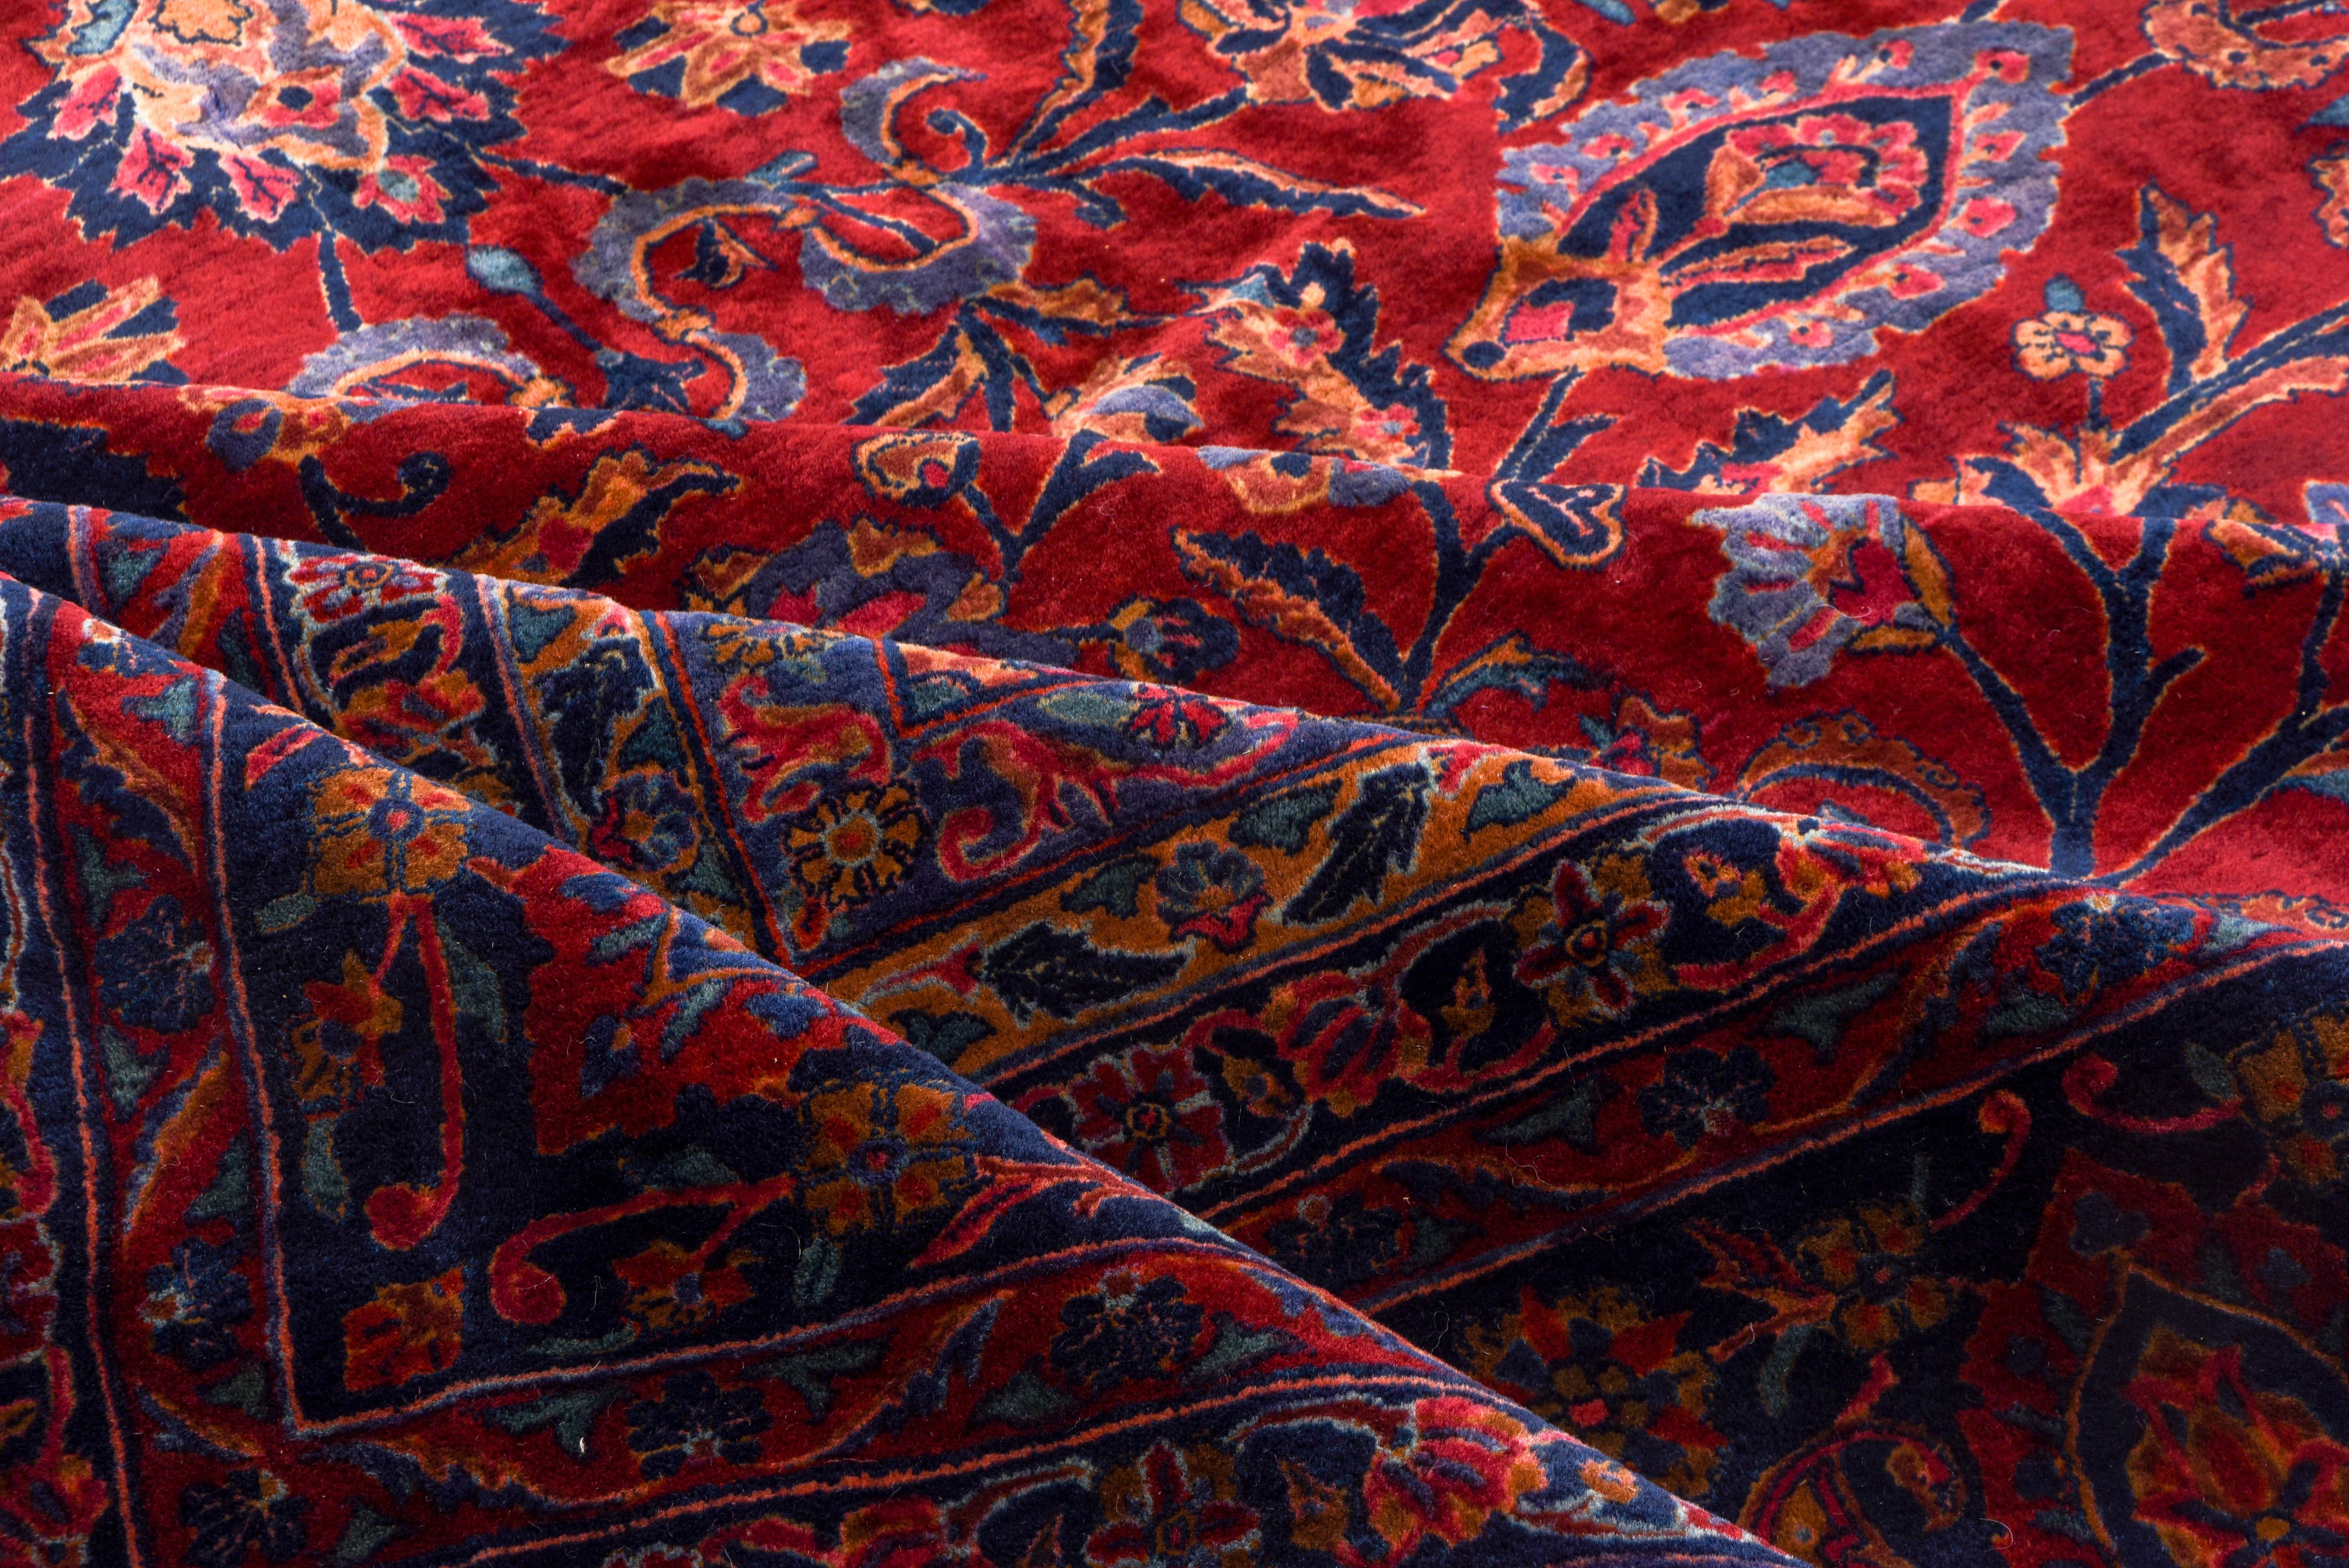 The red or blue contemporaneous Sarouk palette is reflected in this outstanding large and top condition central Persian town carpet of English-spun wool The red field with colored bands and palmettes, touched in light blue, is framed by a navy